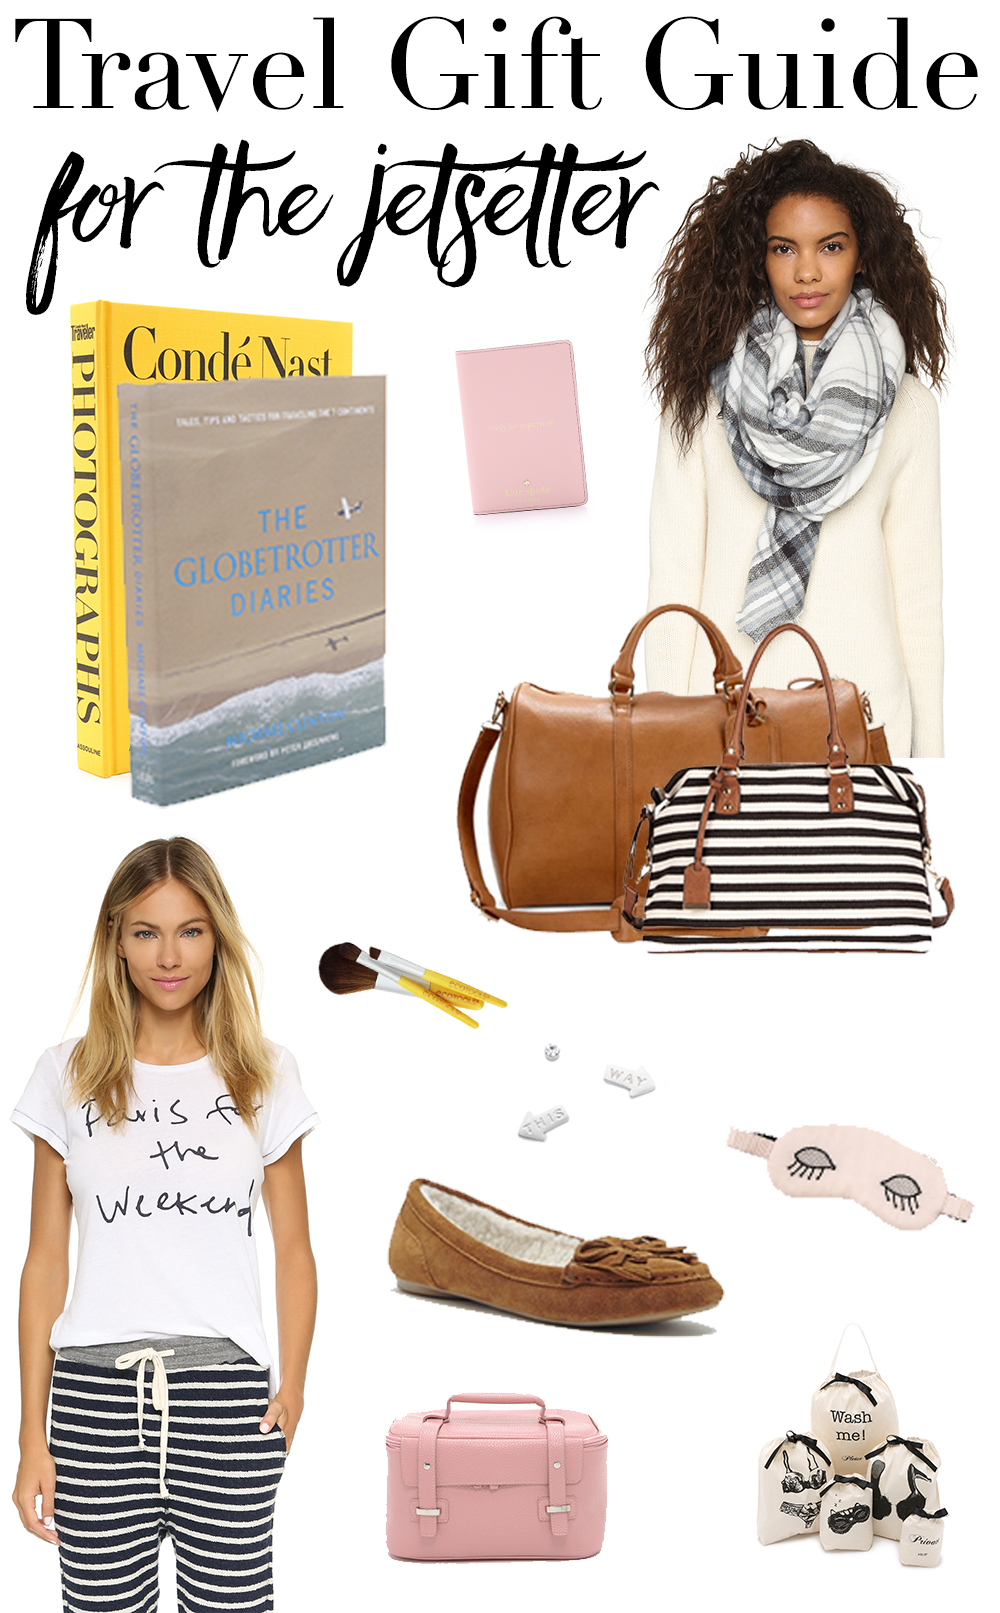 travel gift guide for the jetsetter, holiday gift ideas for traveler, people who travel, travel gift ideas, holiday gift guide, shopbop coupon code, shopbop sale code, shopbop promo code, holiday gifts 2015